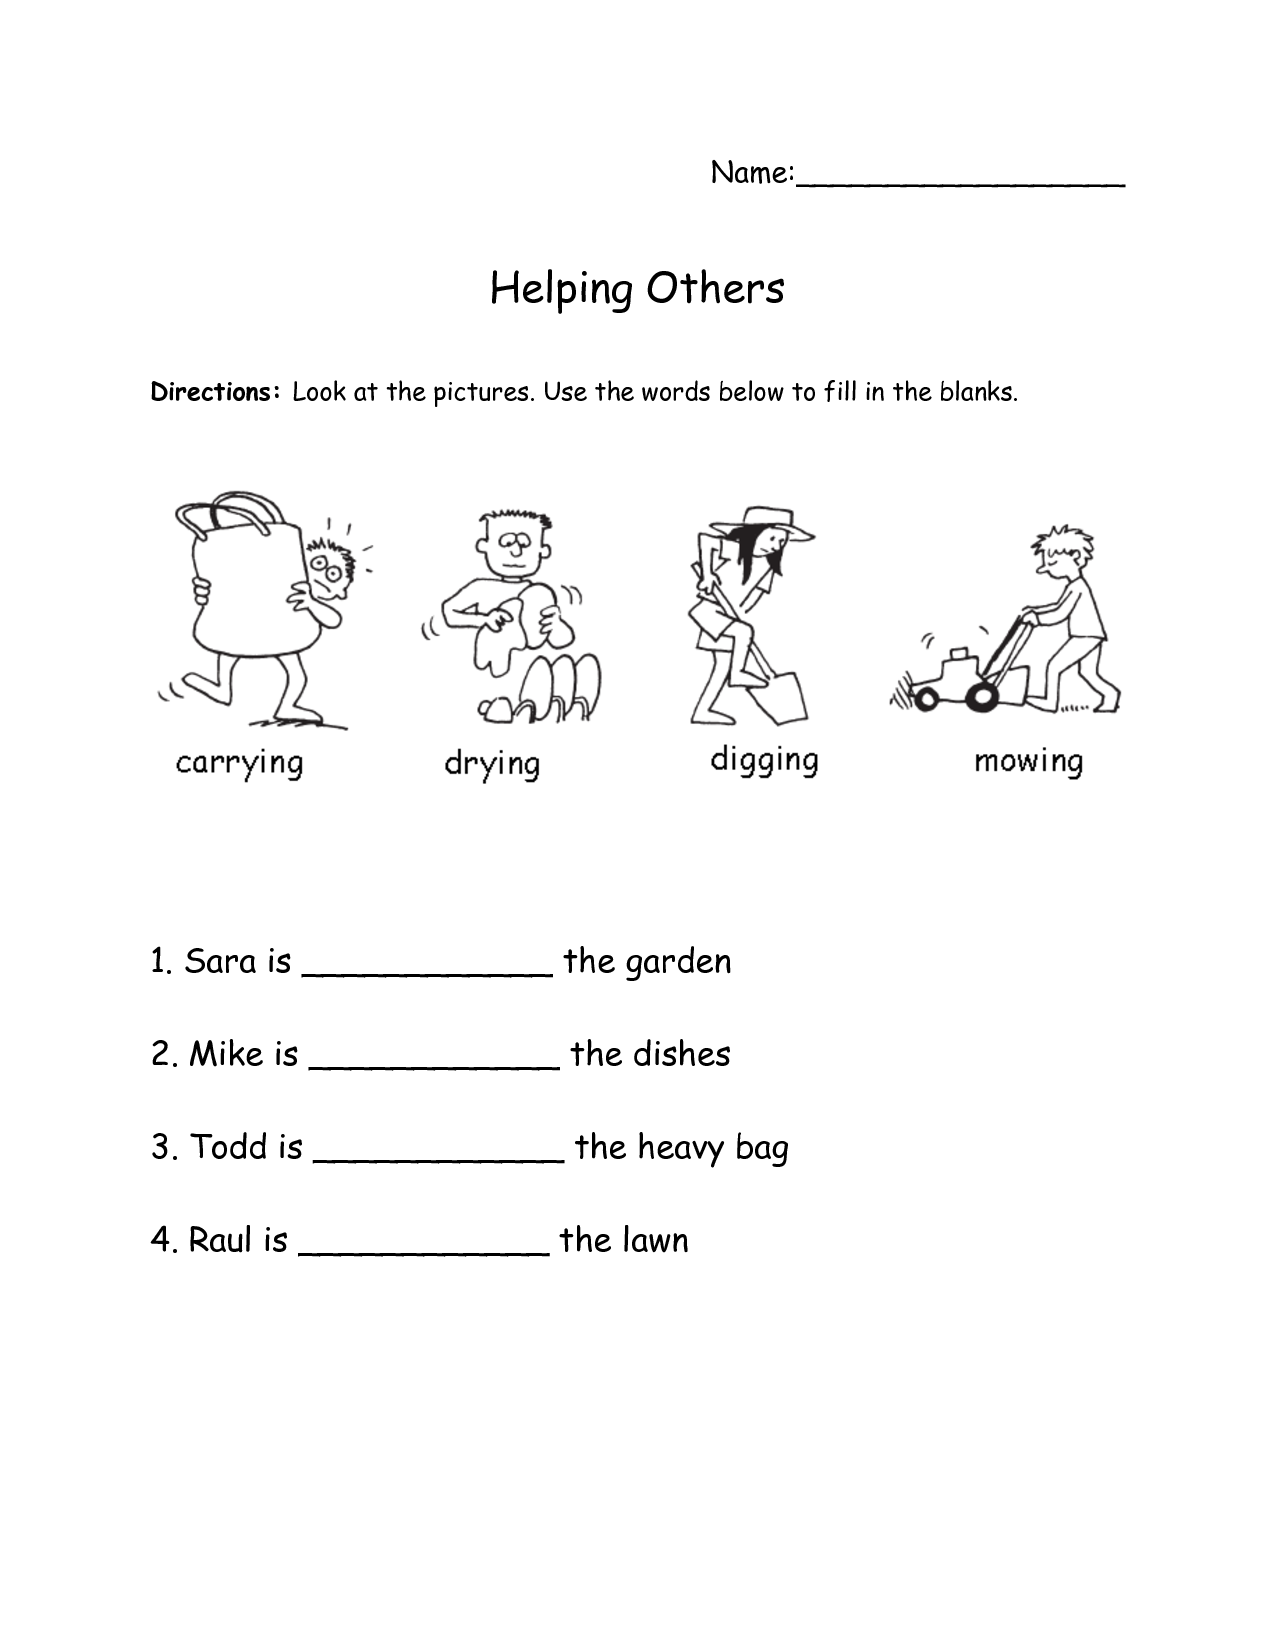 16-best-images-of-verbs-and-helping-verbs-worksheet-linking-verbs